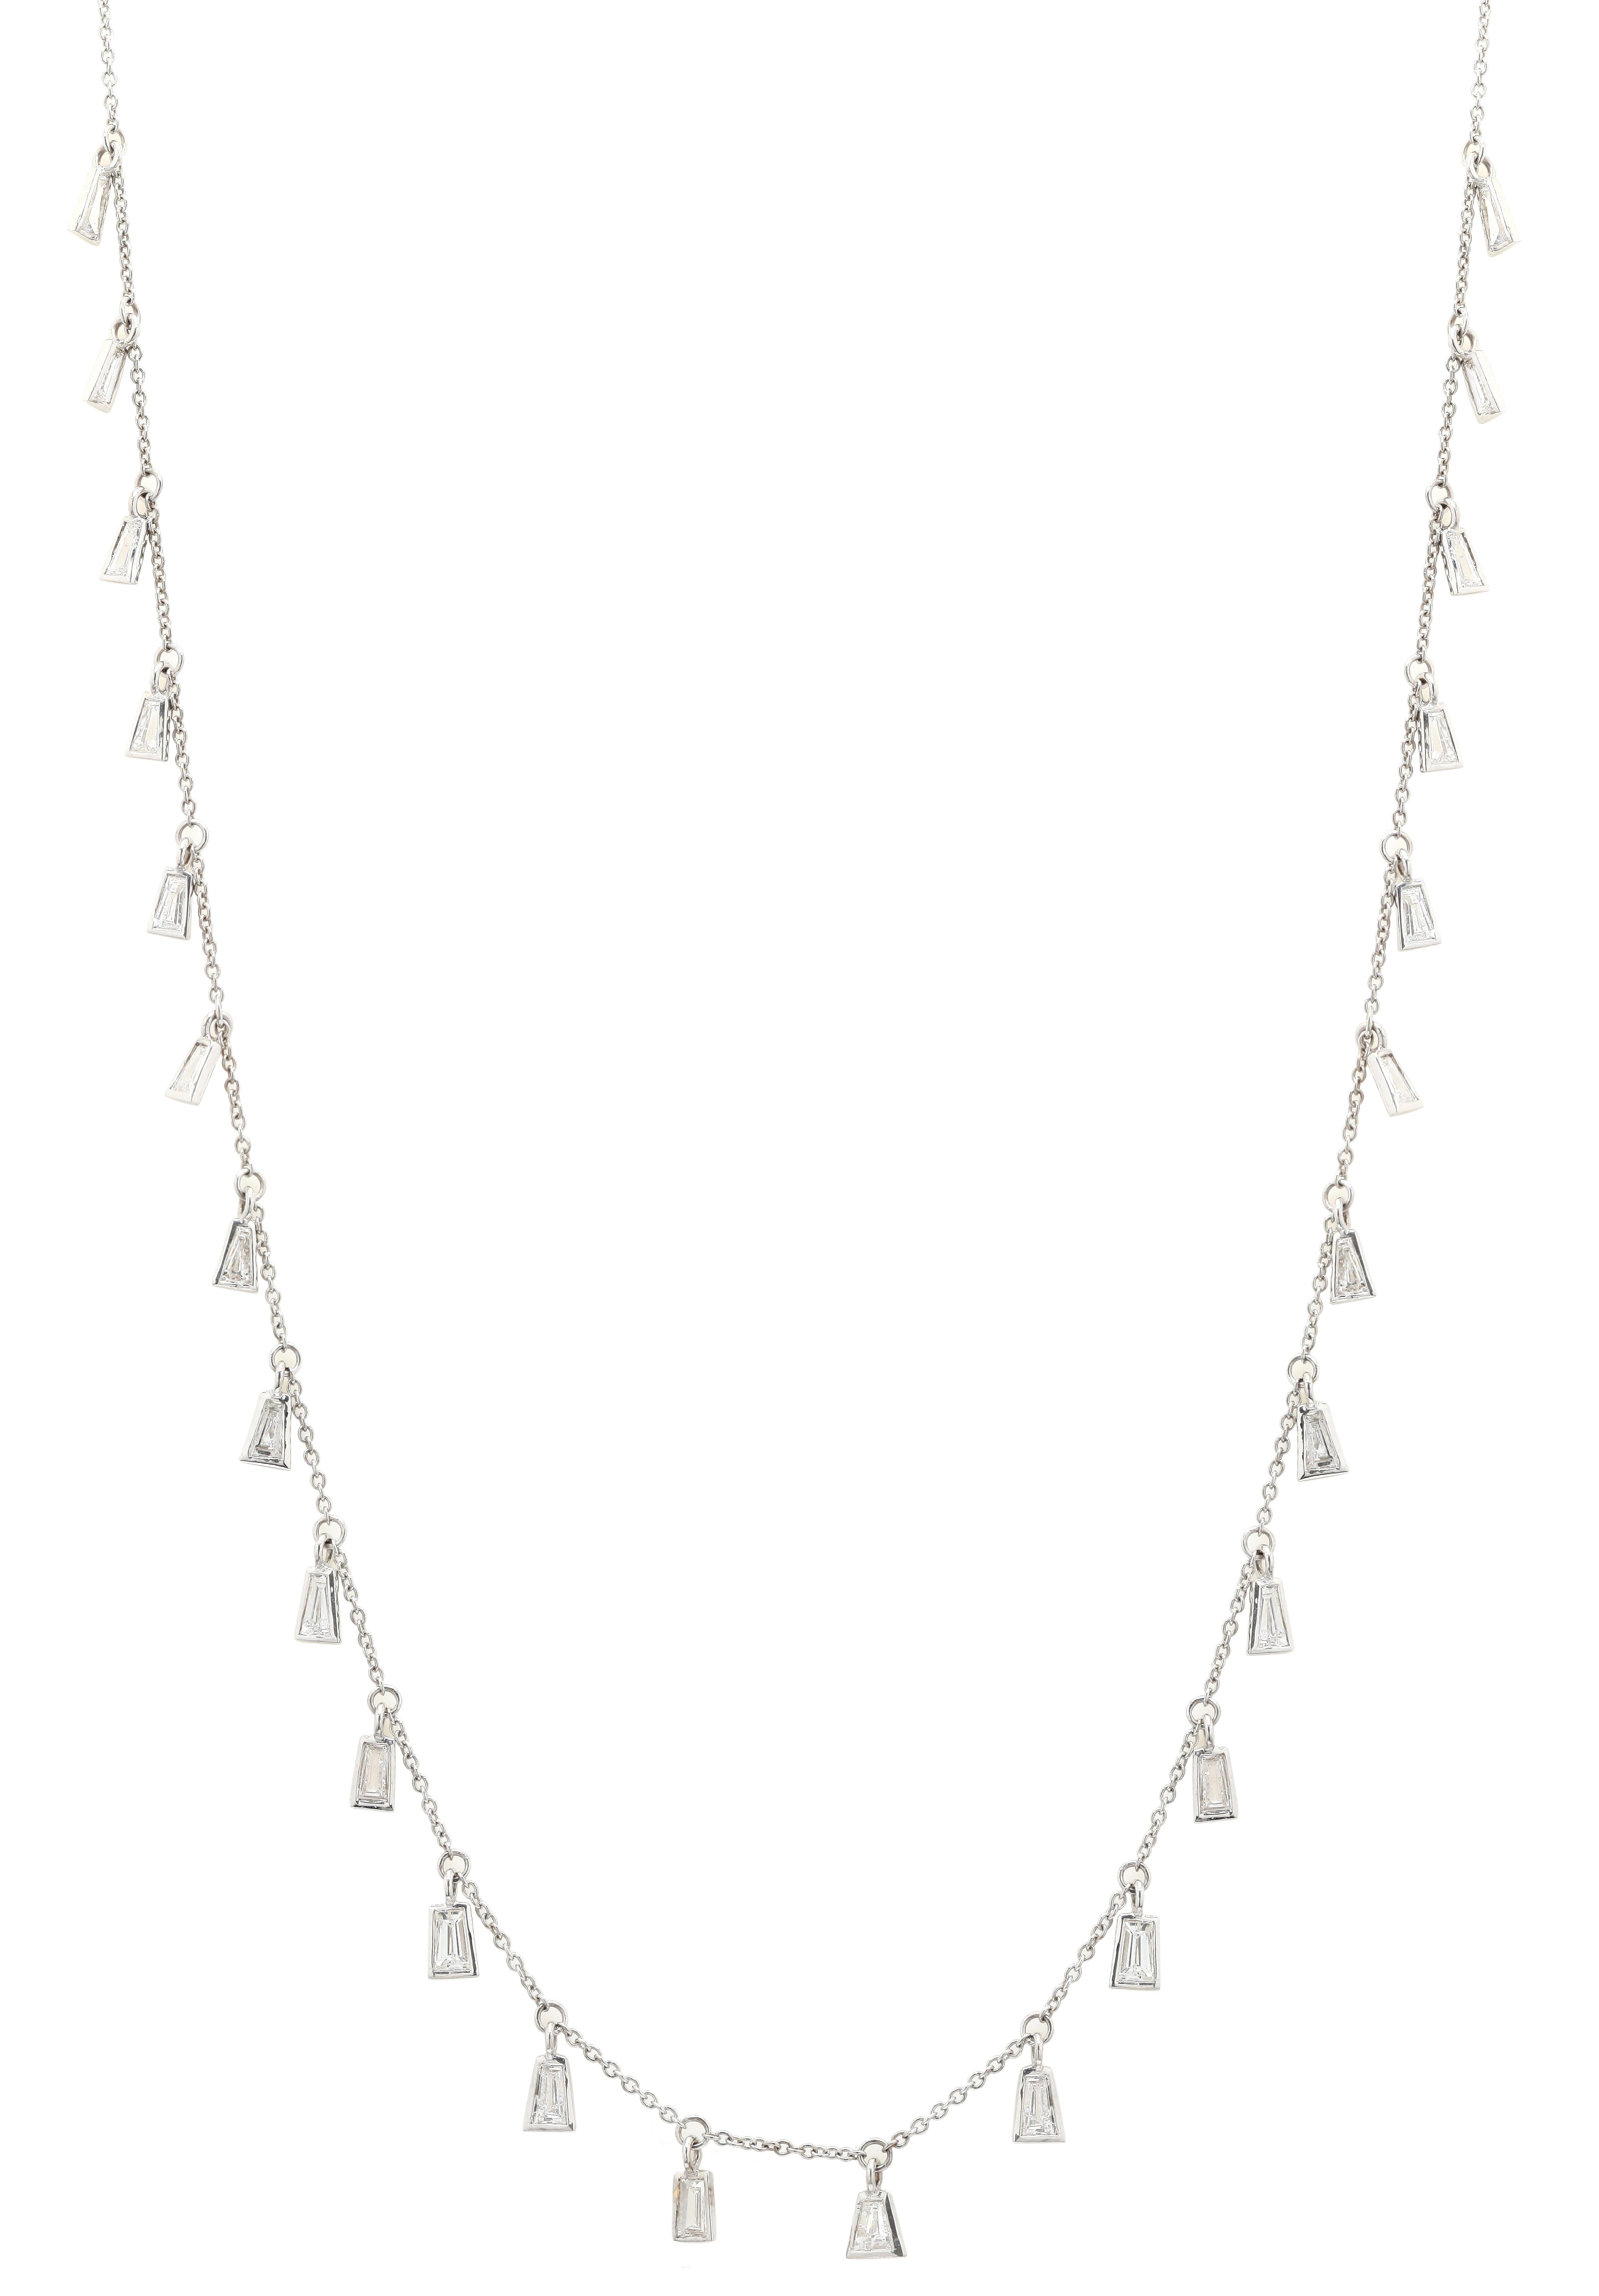 Modern 1.89 Carat Diamond Drop Chain Necklace in 18K White Gold  For Sale